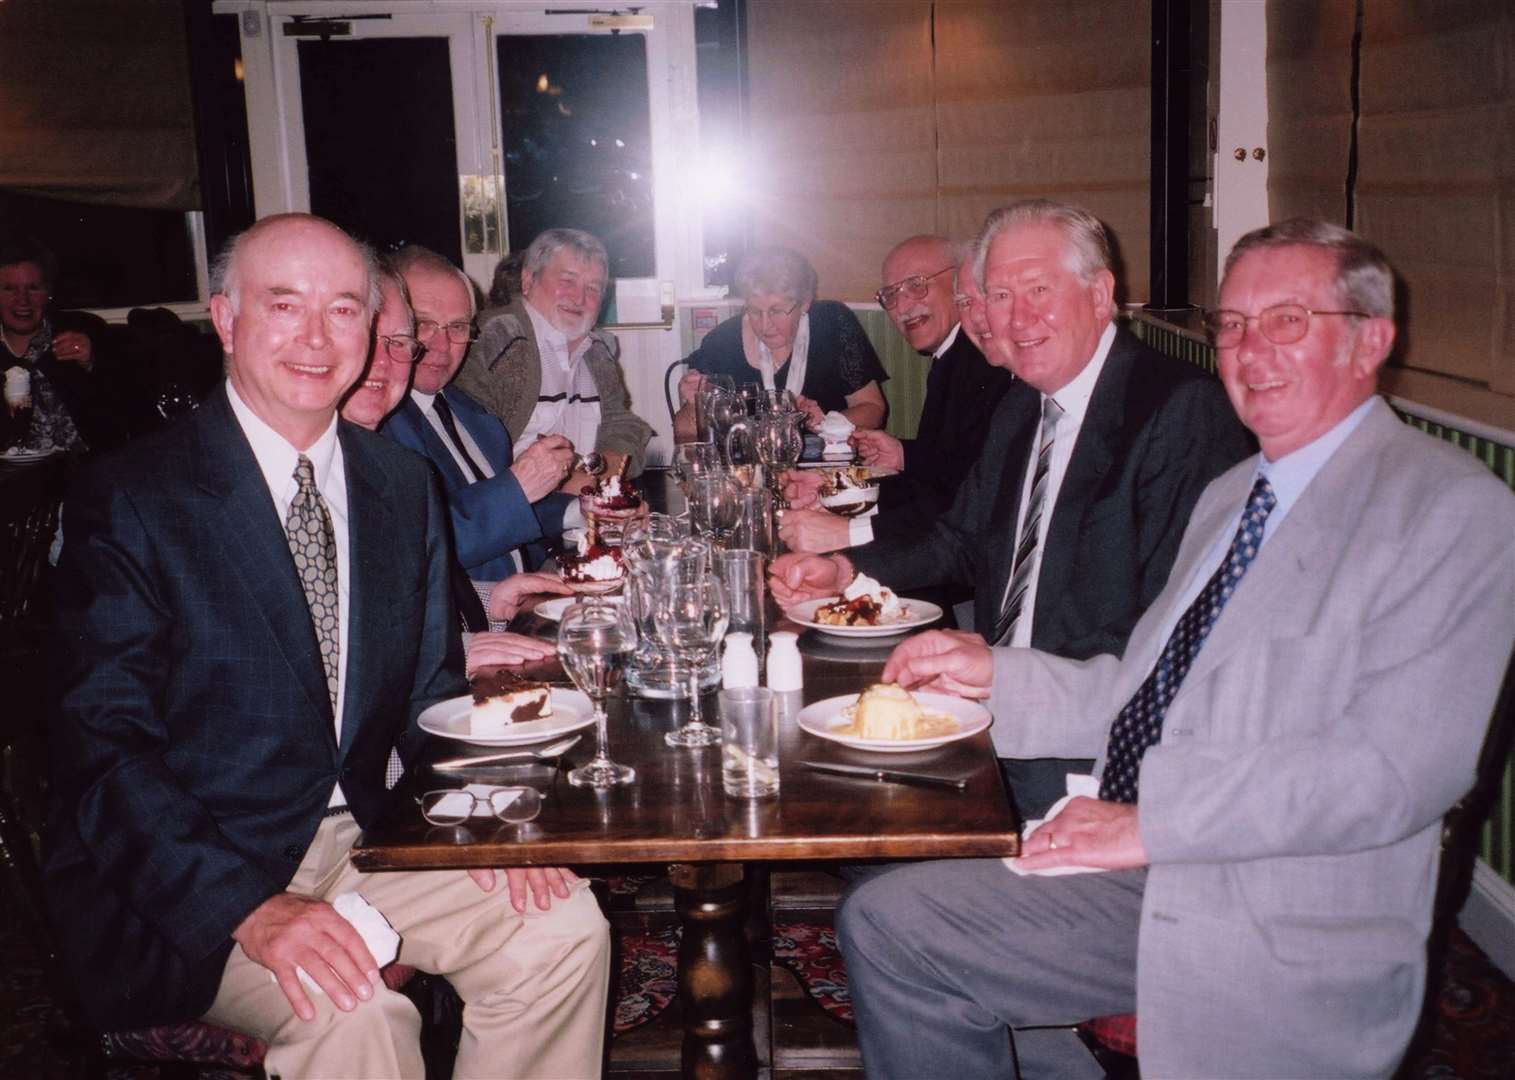 Cliff (left) meeting up with old schoolfriends from the Maidstone Technical School, at the Sir Thomas Wyatt pub in Allington, in 2004